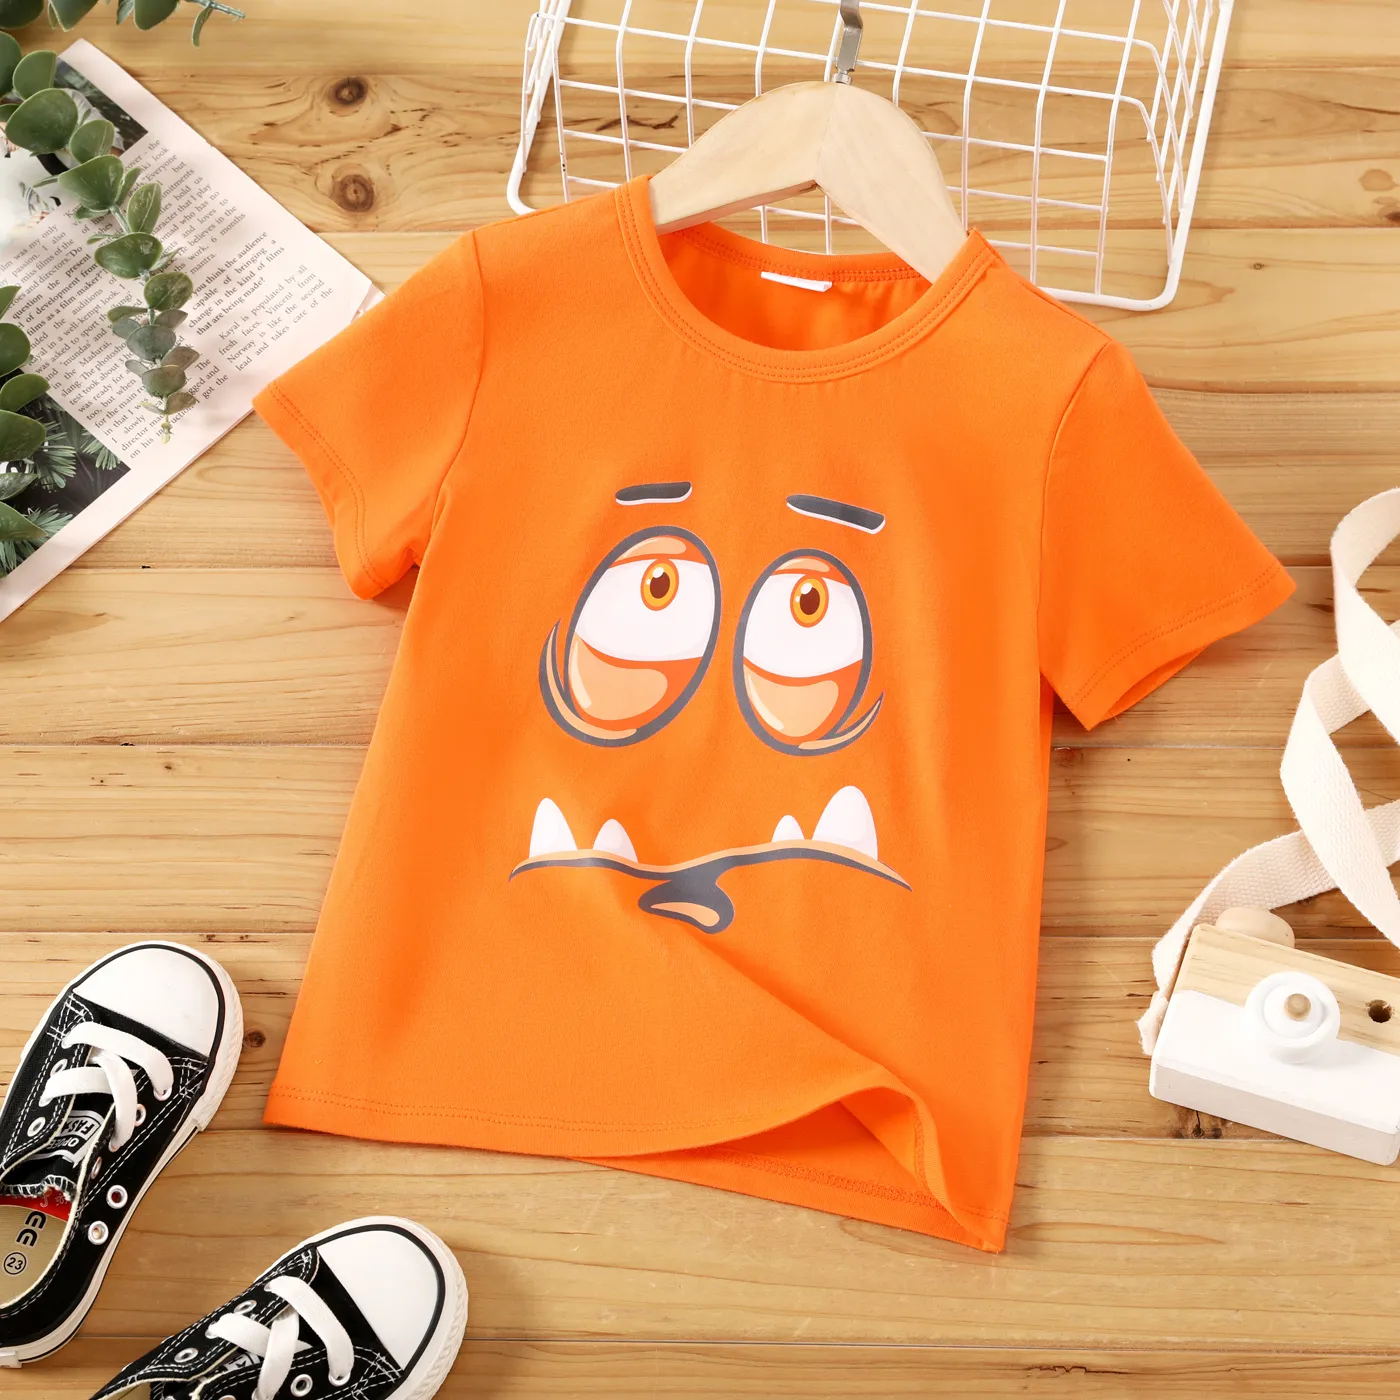 Toddler Boy Funny Face Print Tee à Manches Courtes